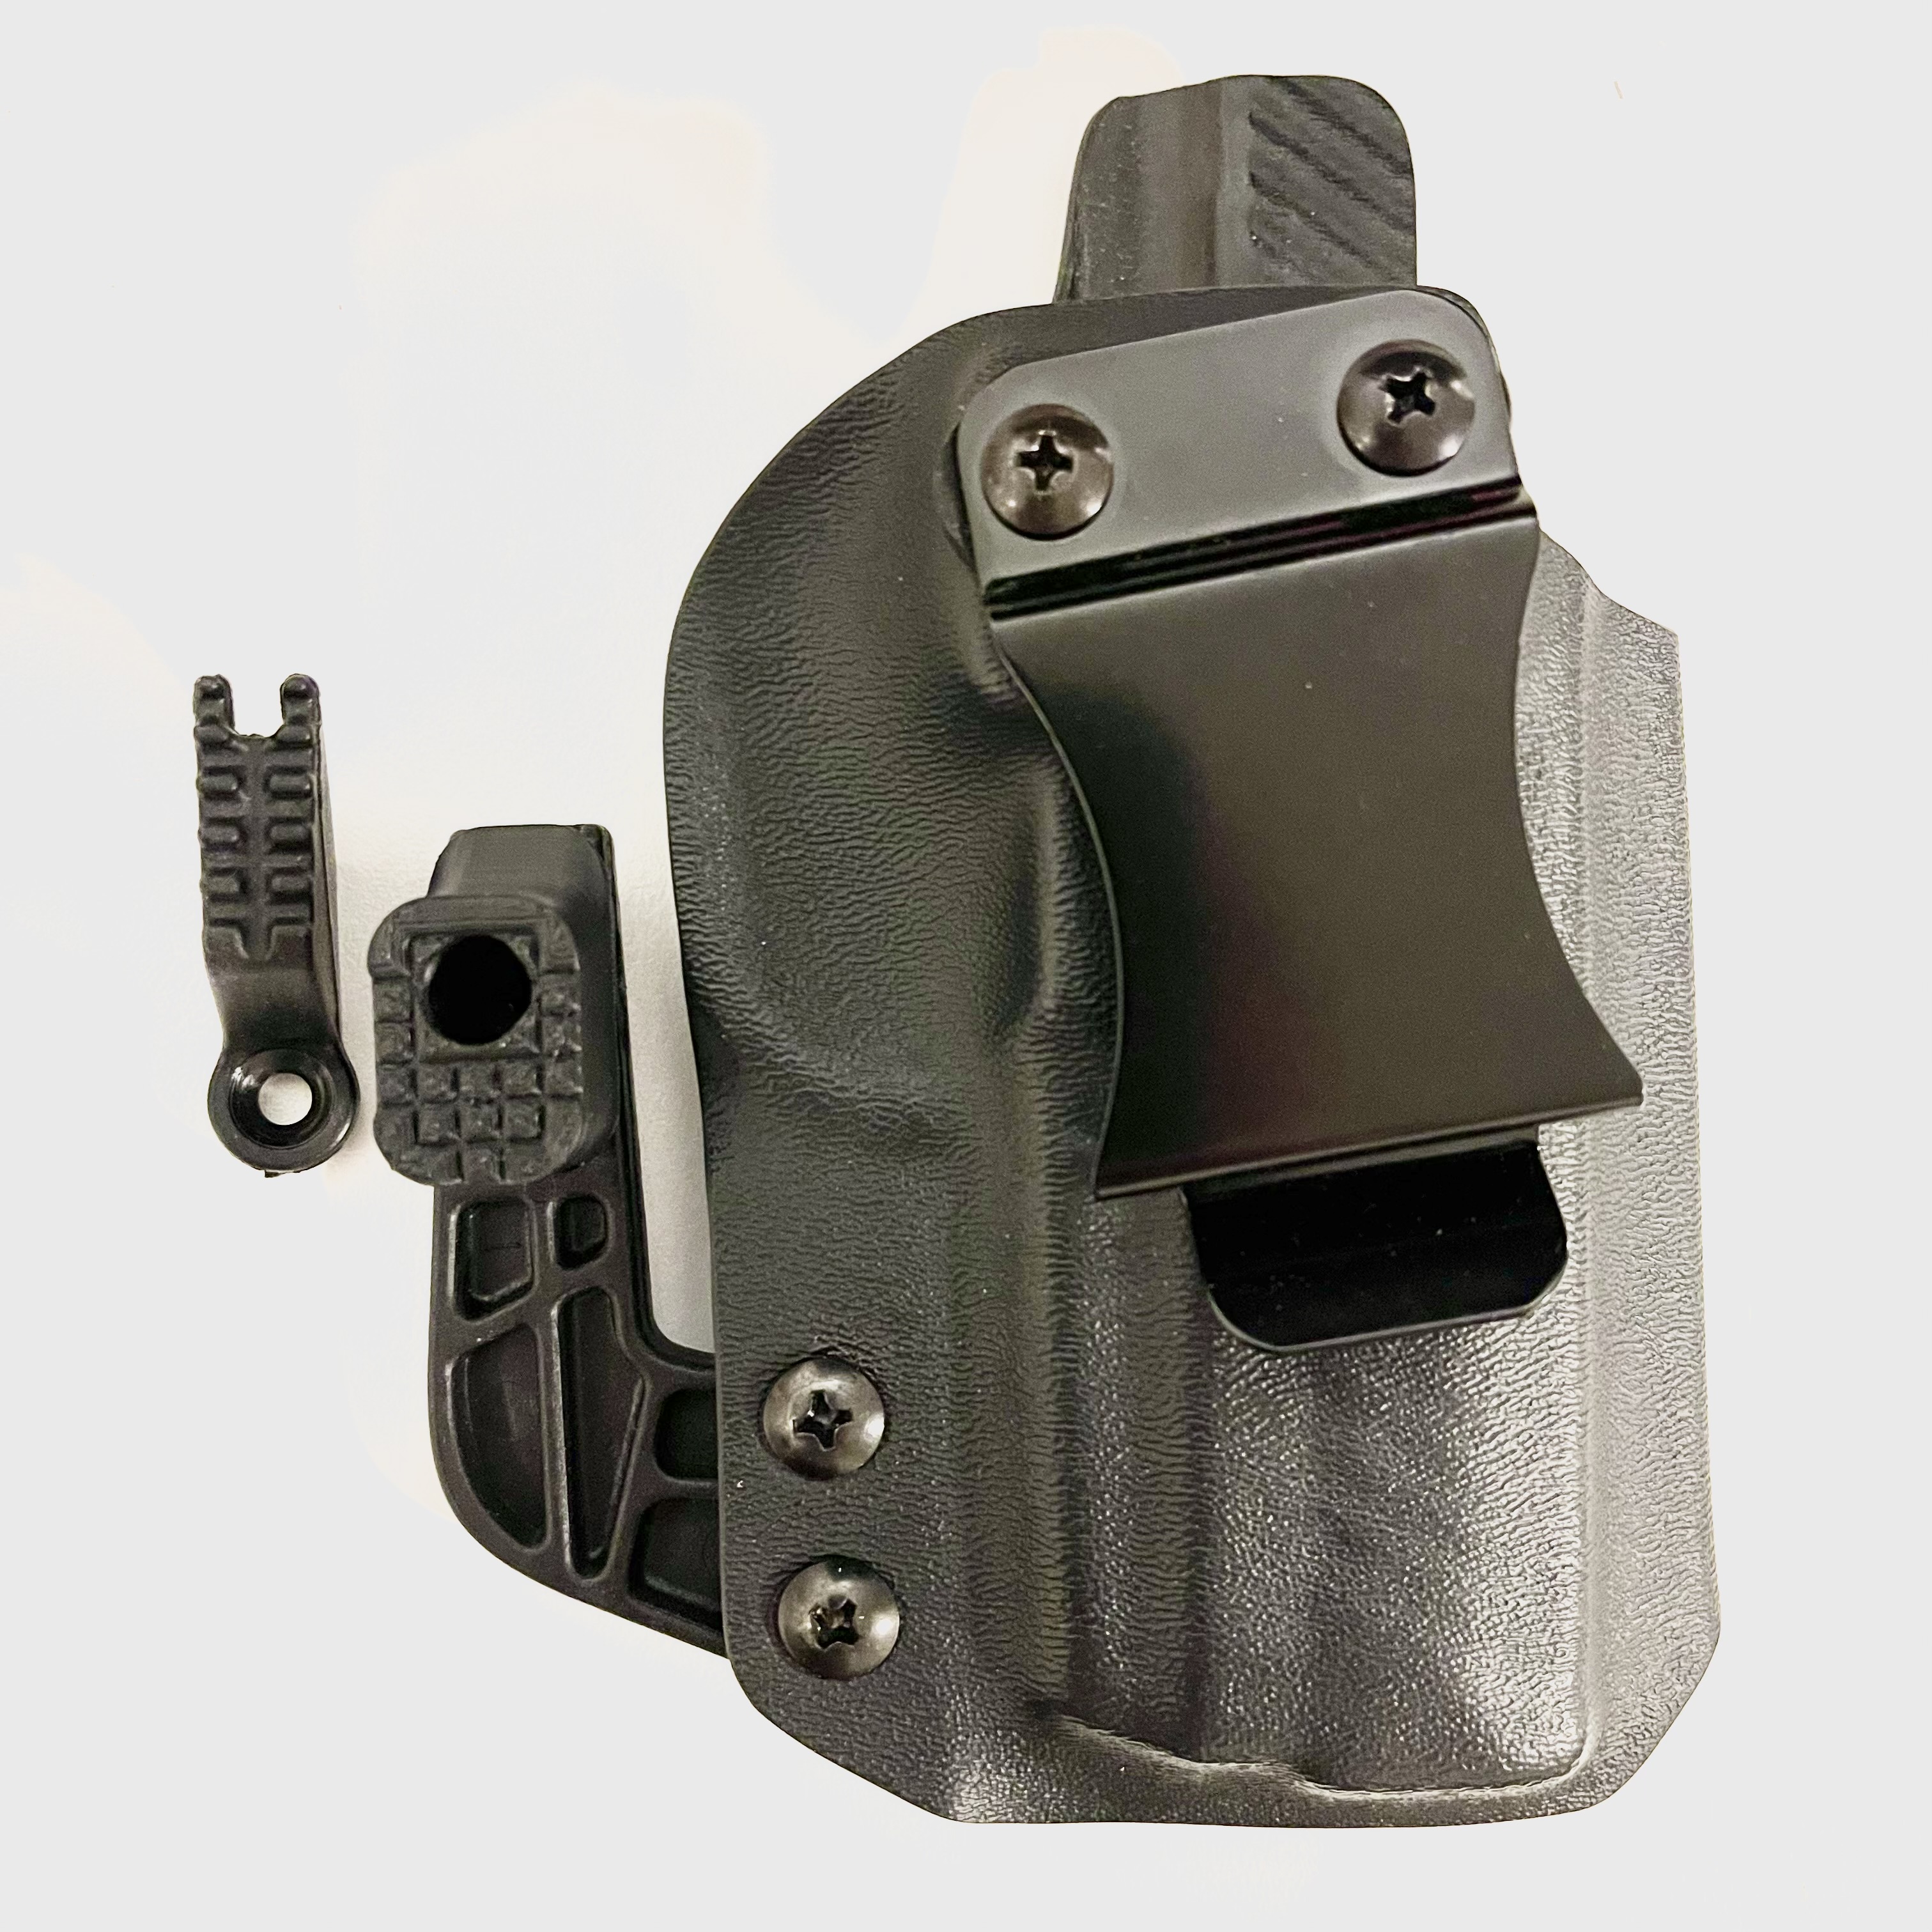 Holster Claw for Black Point Tactical Holsters